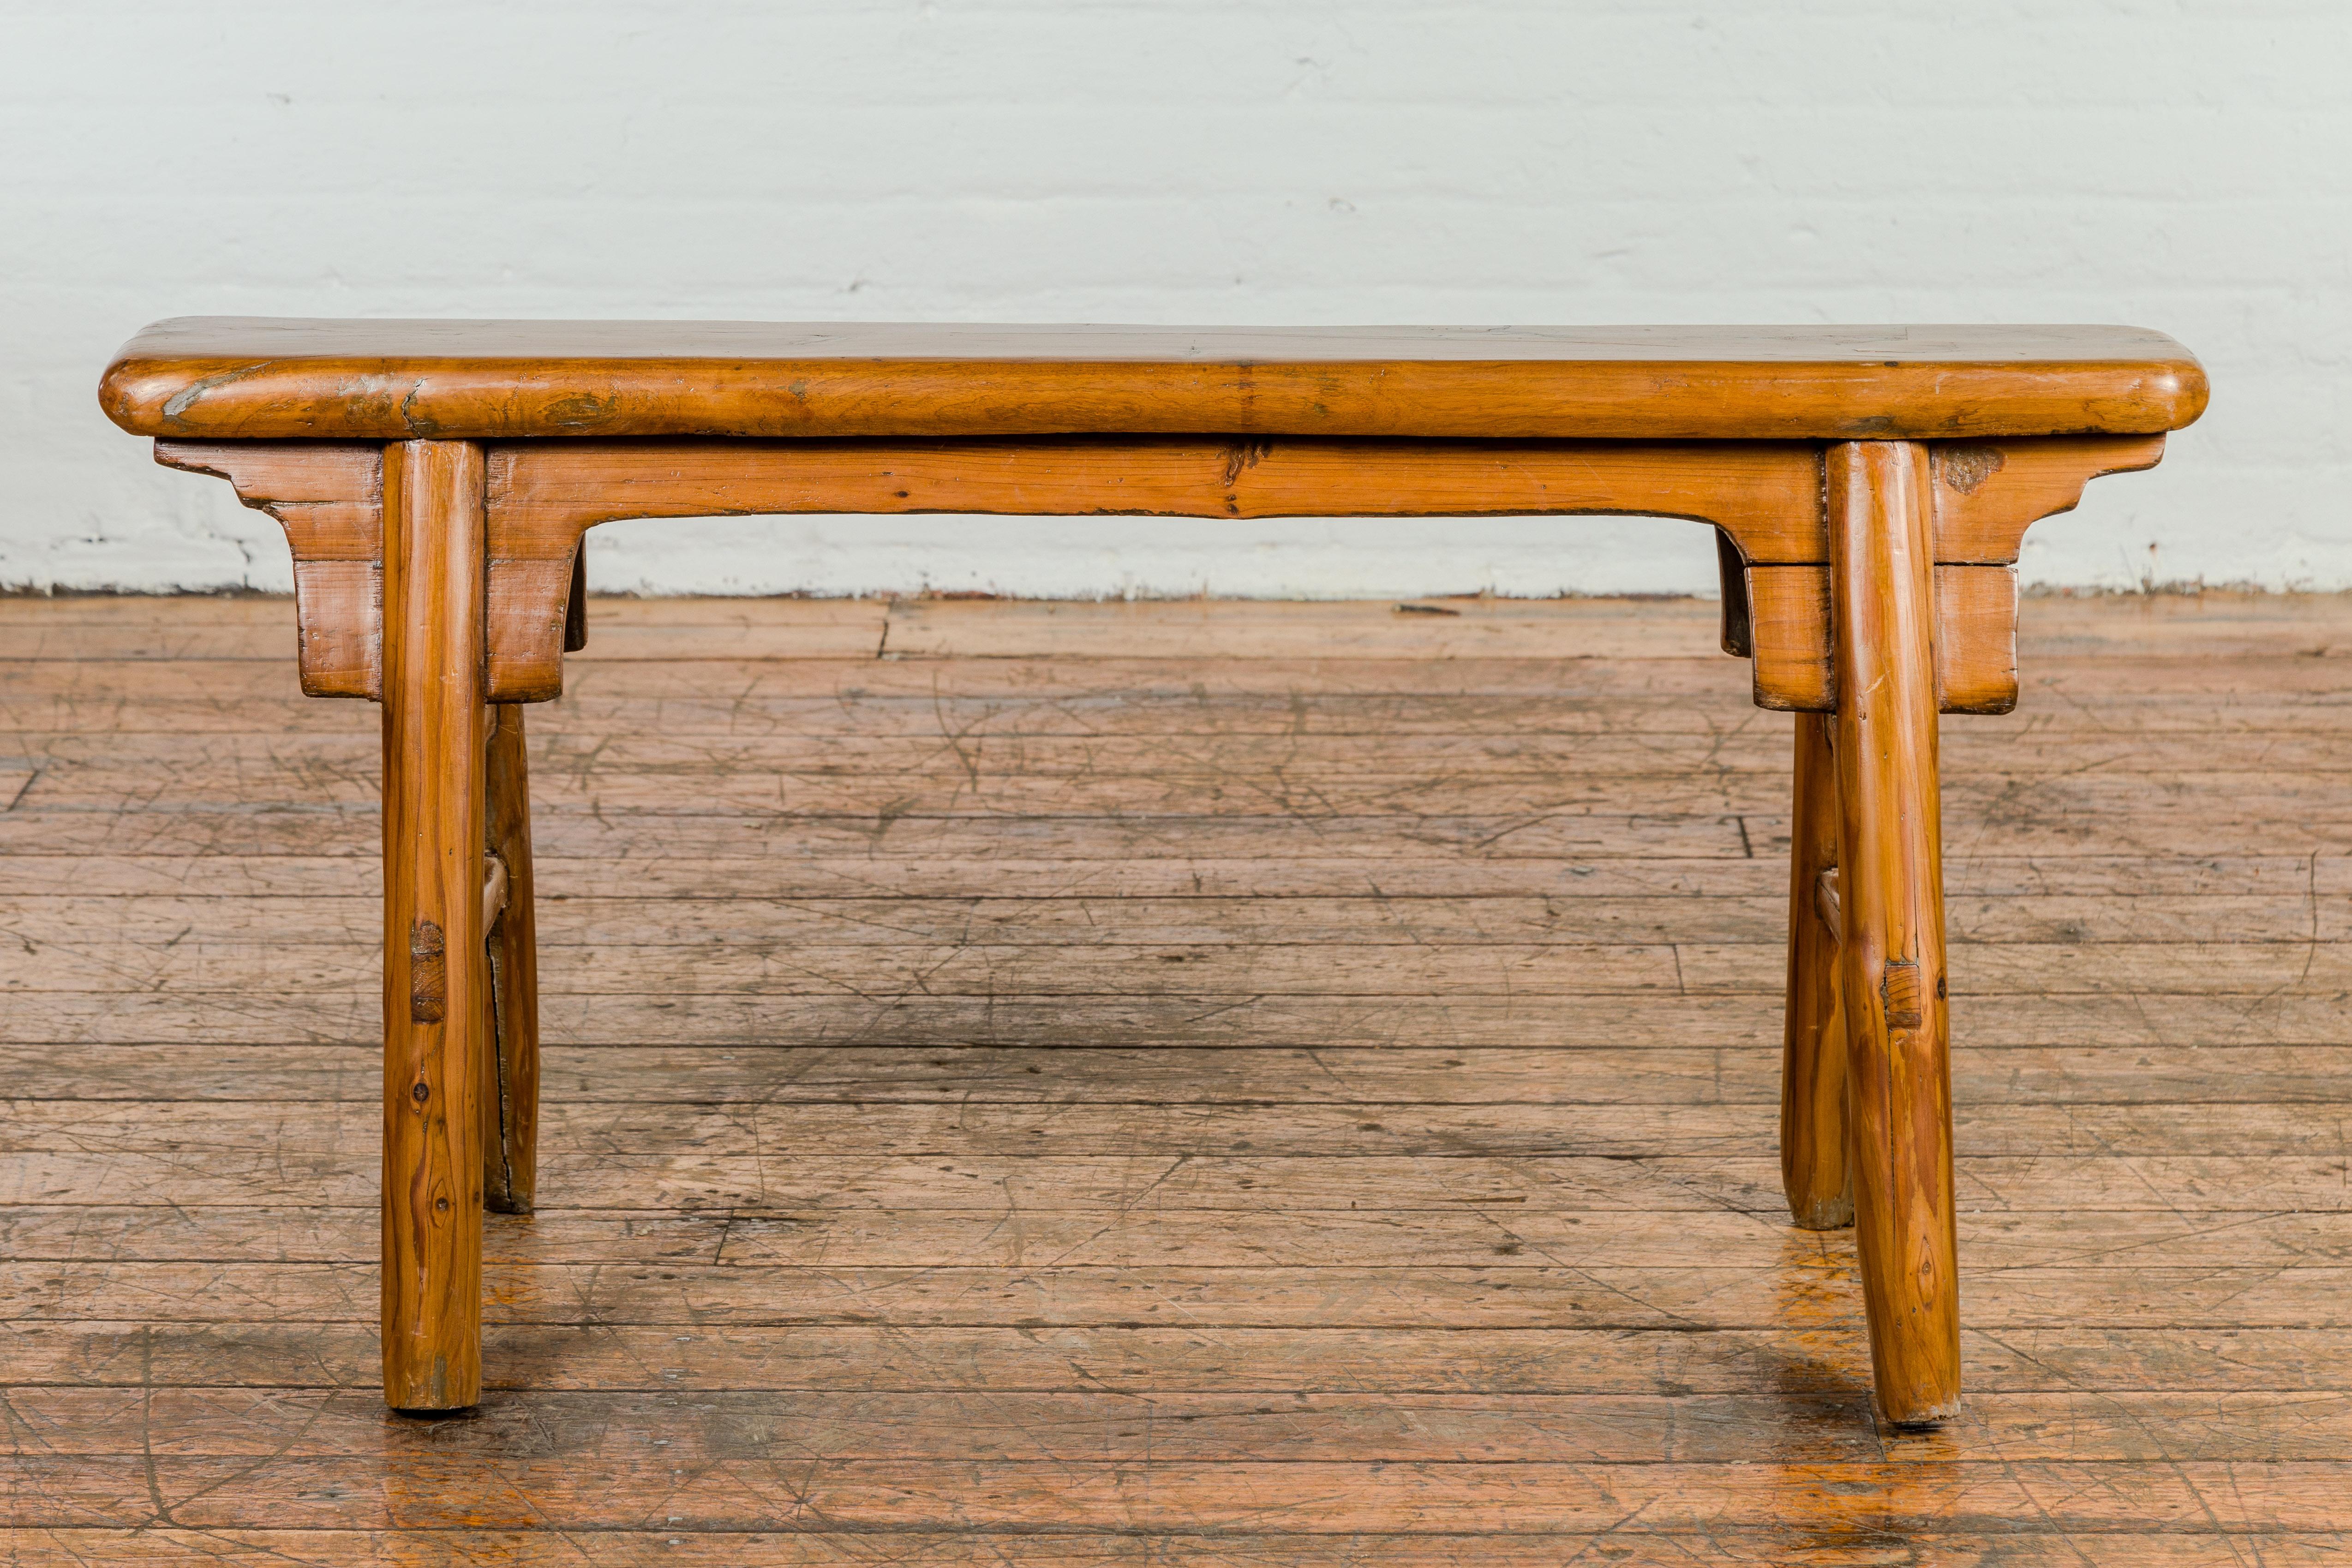 Javanese Small Vintage A-Frame Wooden Bench with Rustic Appearance and Splaying Legs For Sale